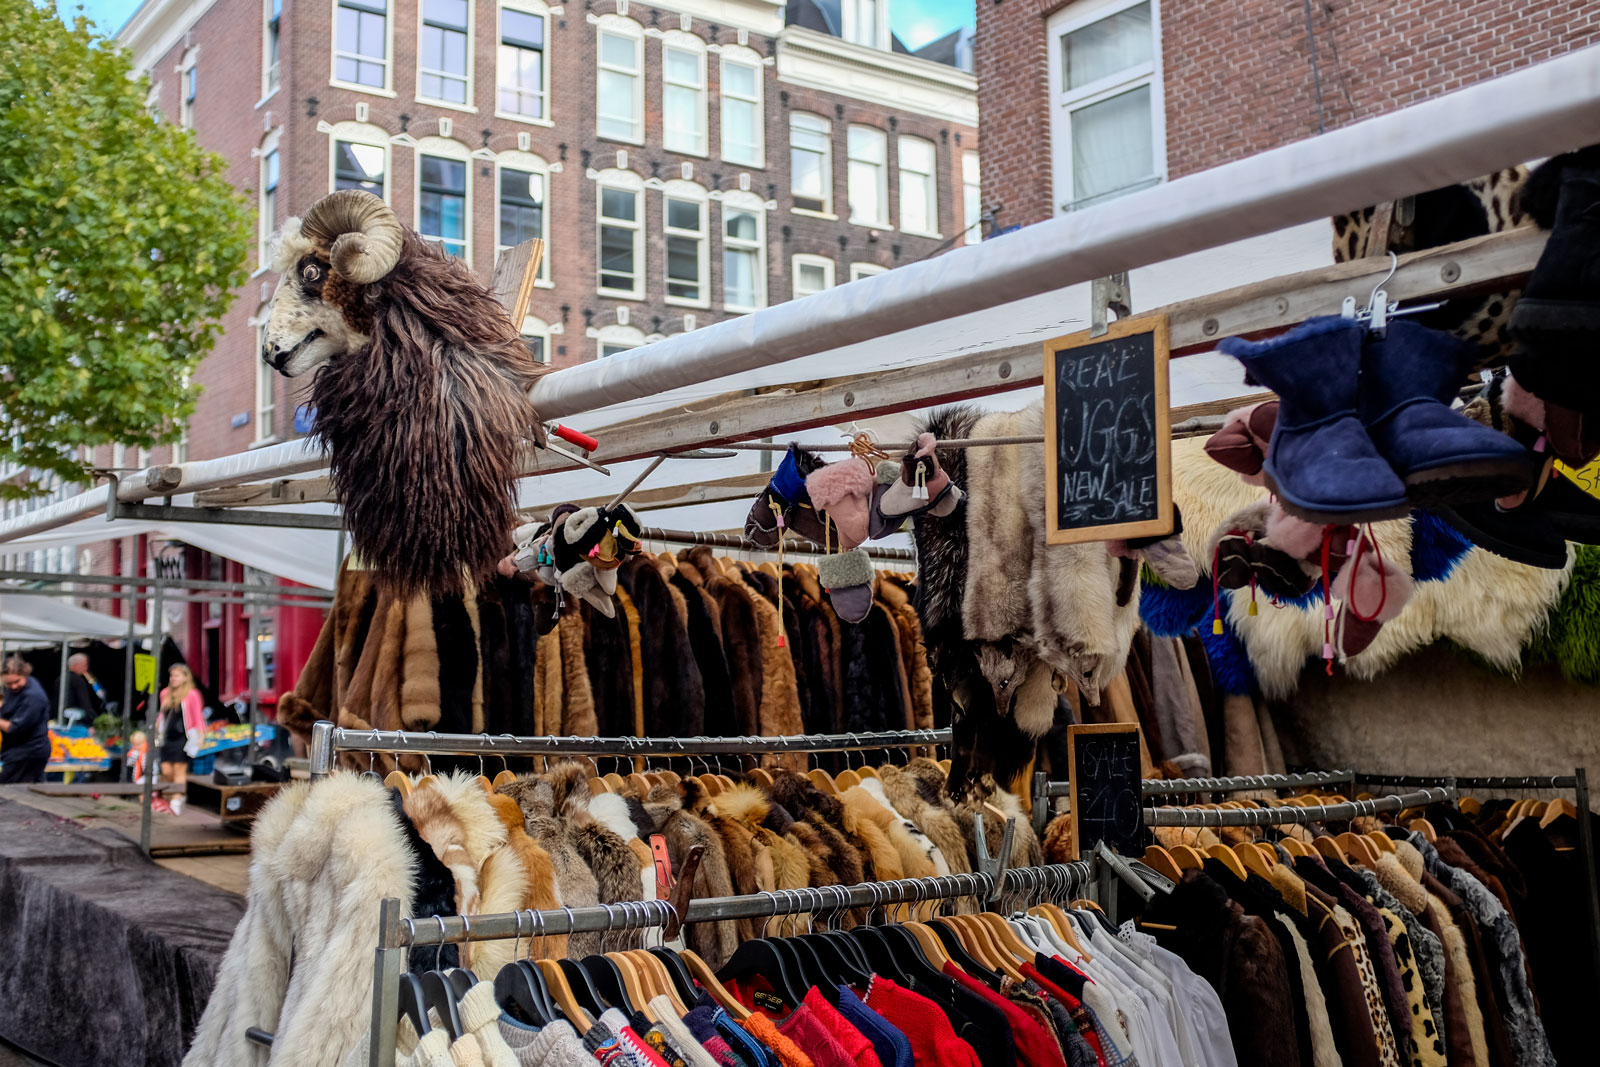 Clothing for sale at Albert Cuyp Market